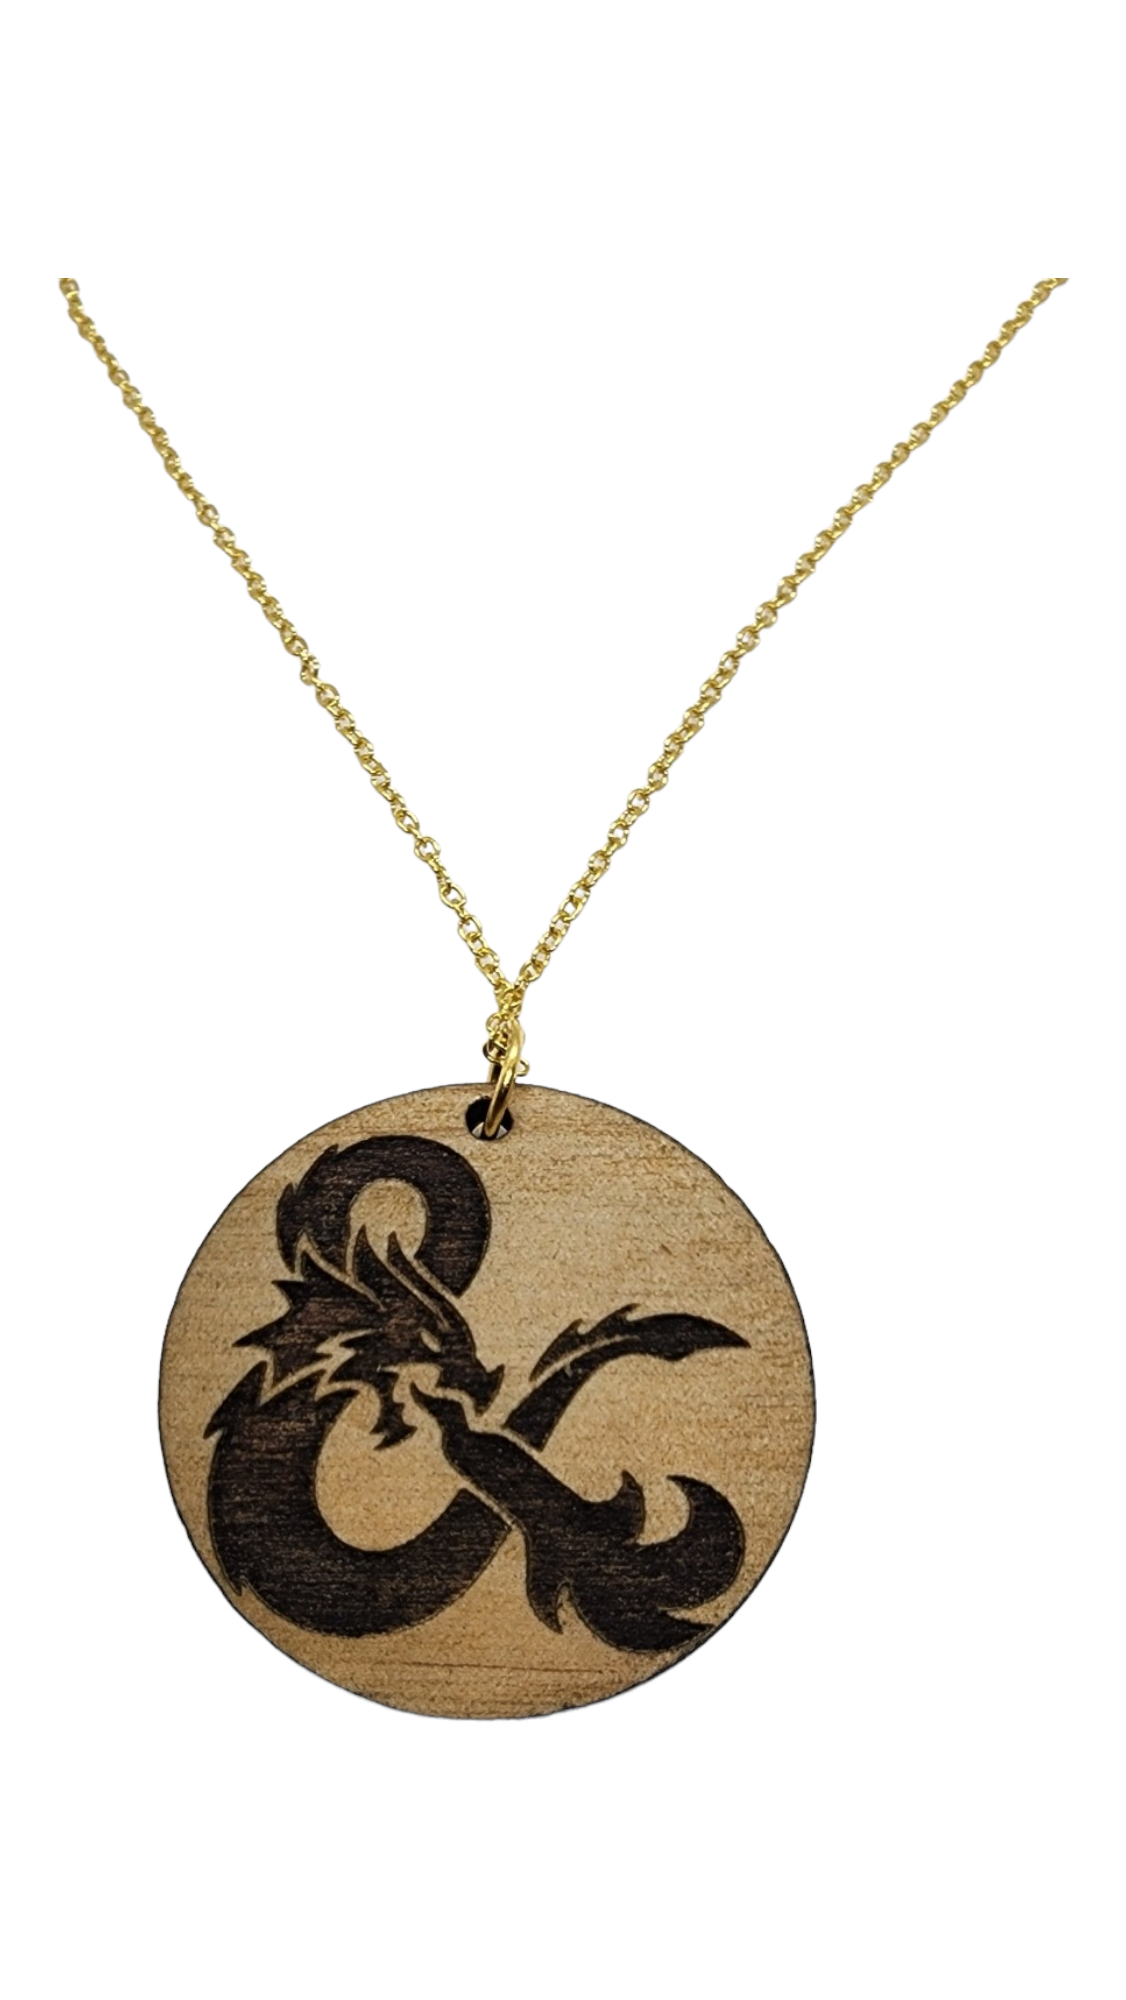 D&D Ampersand Design Wood Painted/Stained Necklace Handmade Laser Cut/Engraved